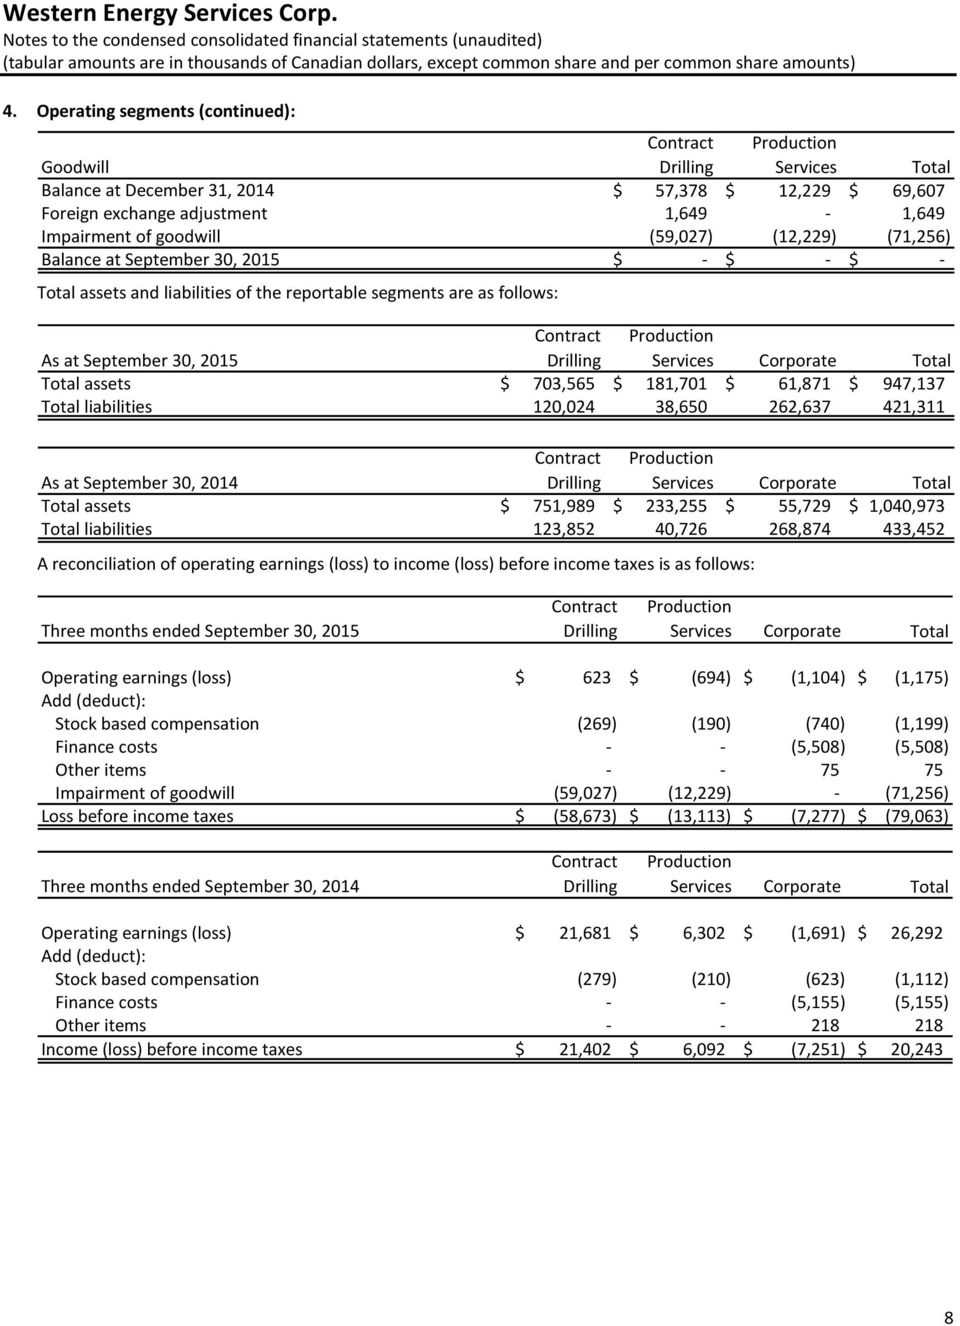 liabilities 120,024 38,650 262,637 421,311 As at September 30, 2014 Services Corporate assets $ 751,989 $ 233,255 $ 55,729 $ 1,040,973 liabilities 123,852 40,726 268,874 433,452 A reconciliation of